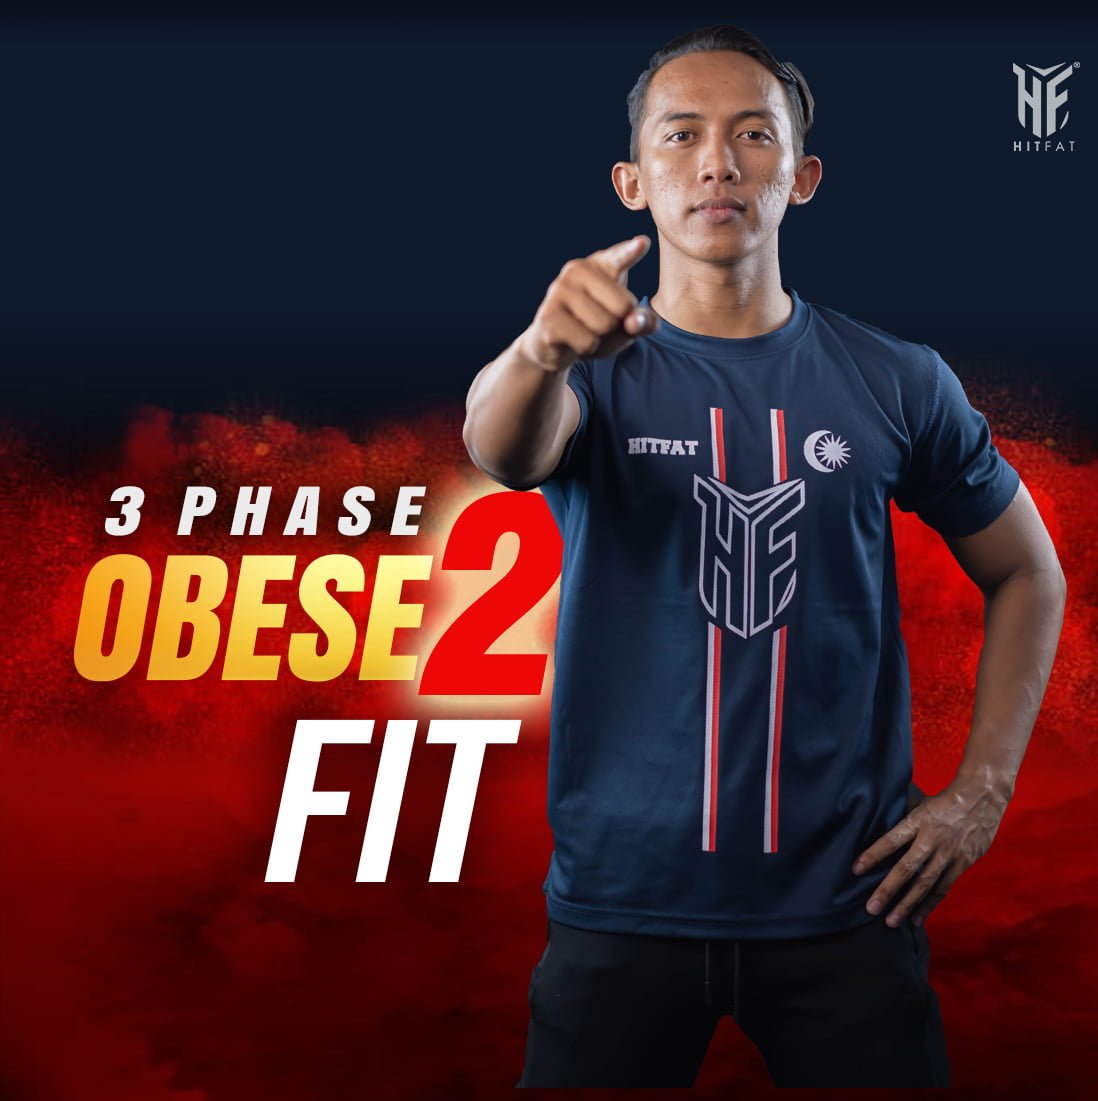 Obese2Fit